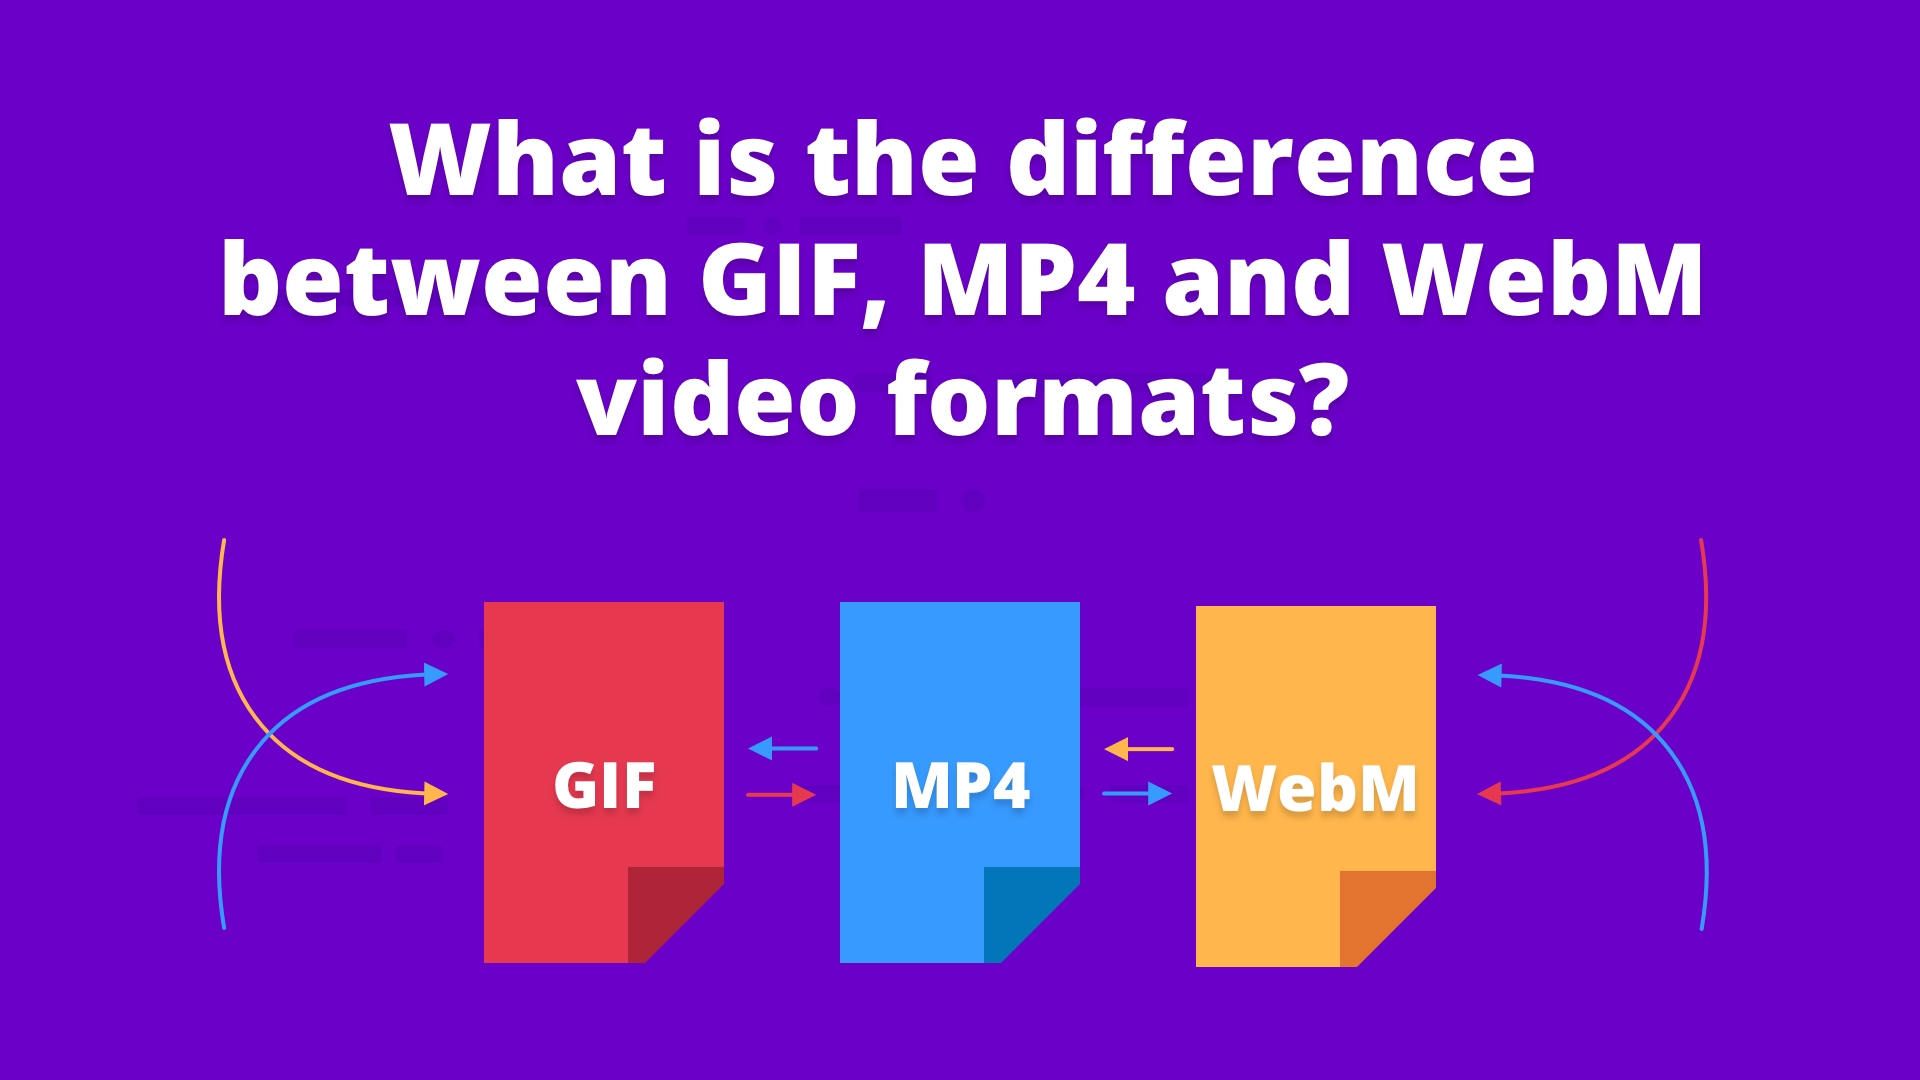 Convert Video To GIF Online – Supports MP4, WebM, AVI, MOV, And